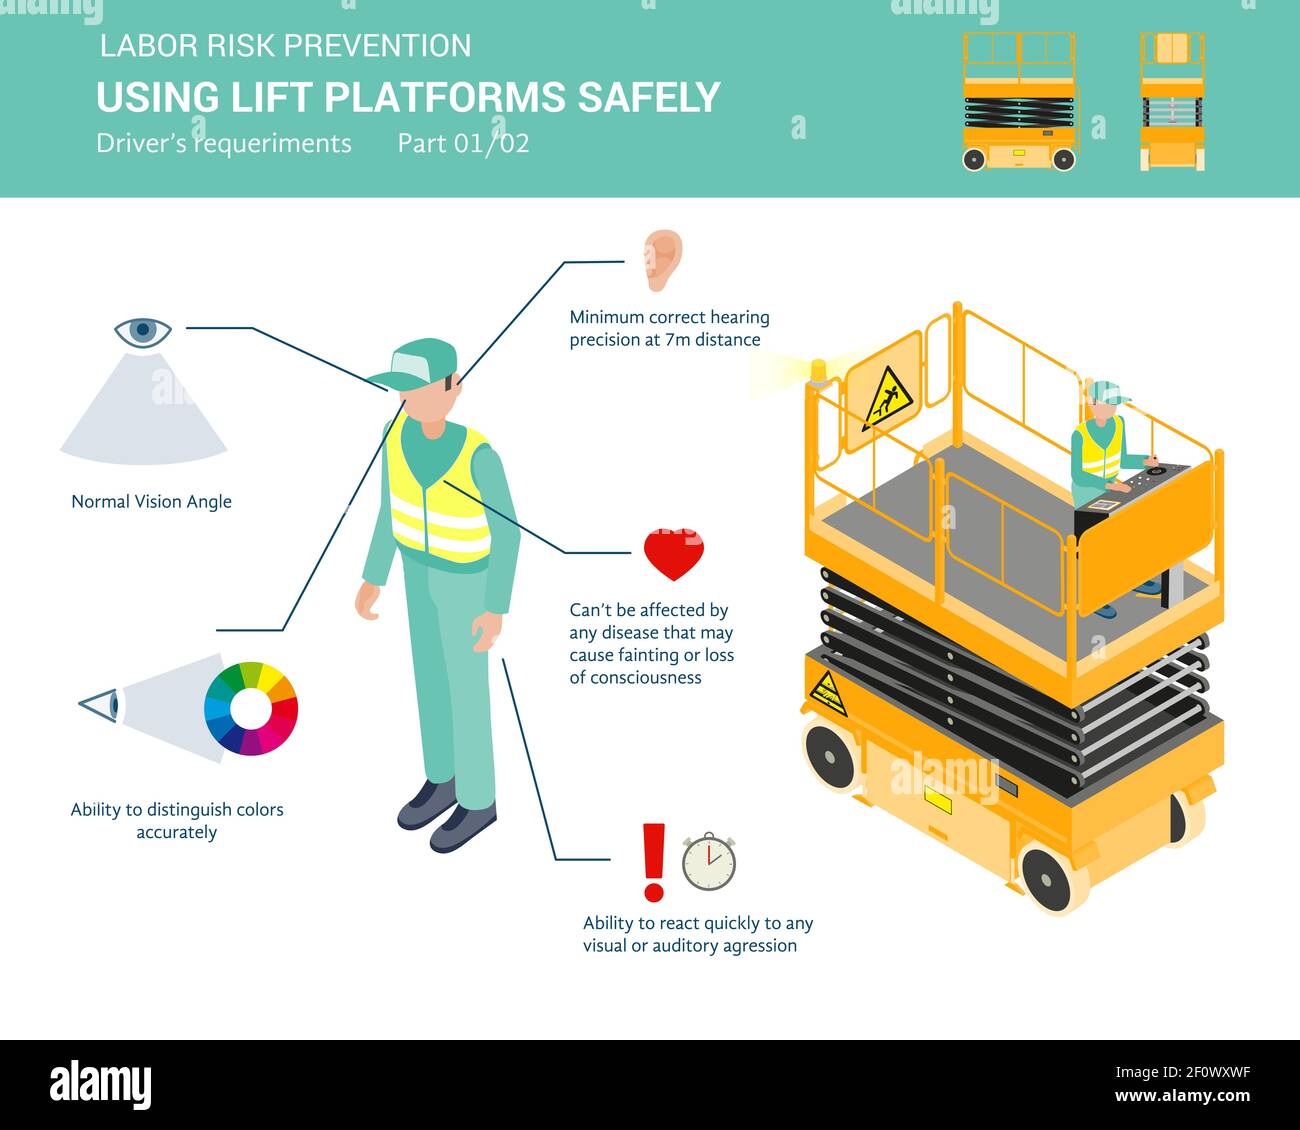 Liift platforms driver requeriments for using lift platforms safely. Isometric illustration, isolated on white background. Part 1 of 2 Stock Vector